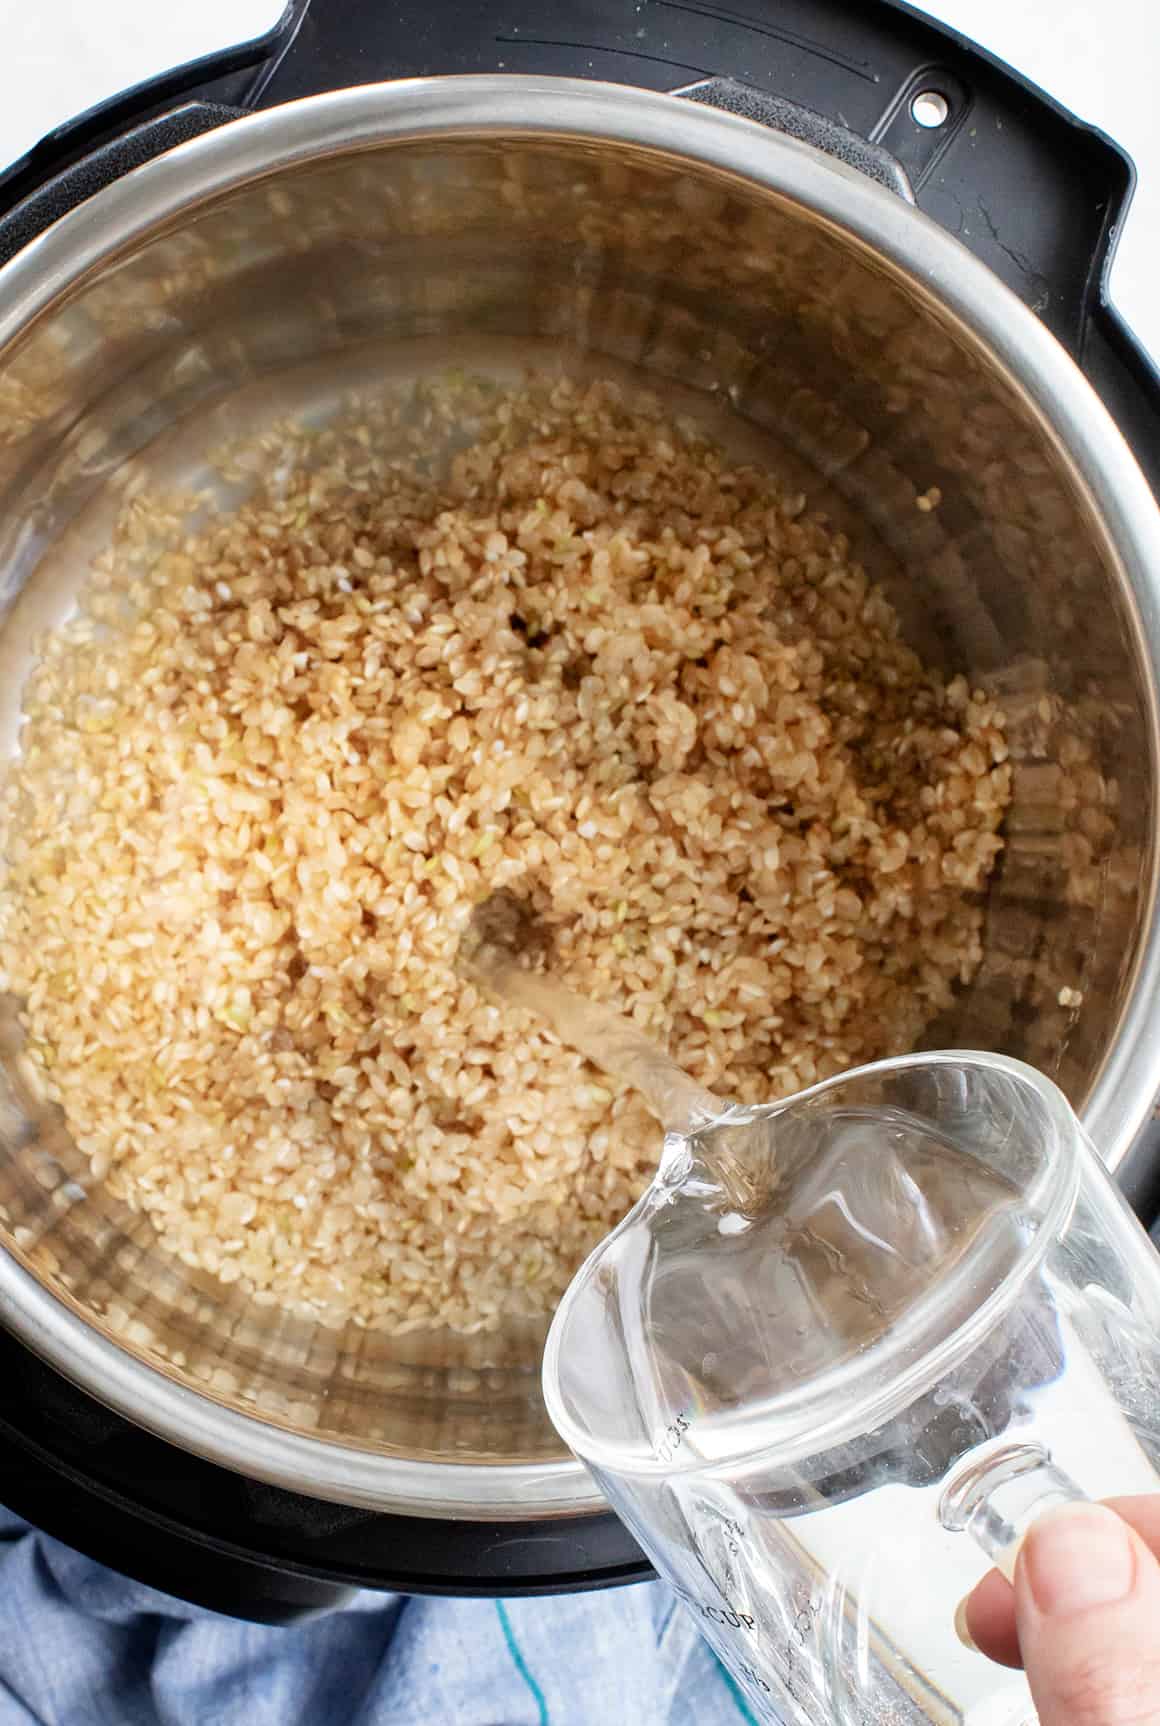 How To Cook Brown Rice In An Electric Pressure Cooker